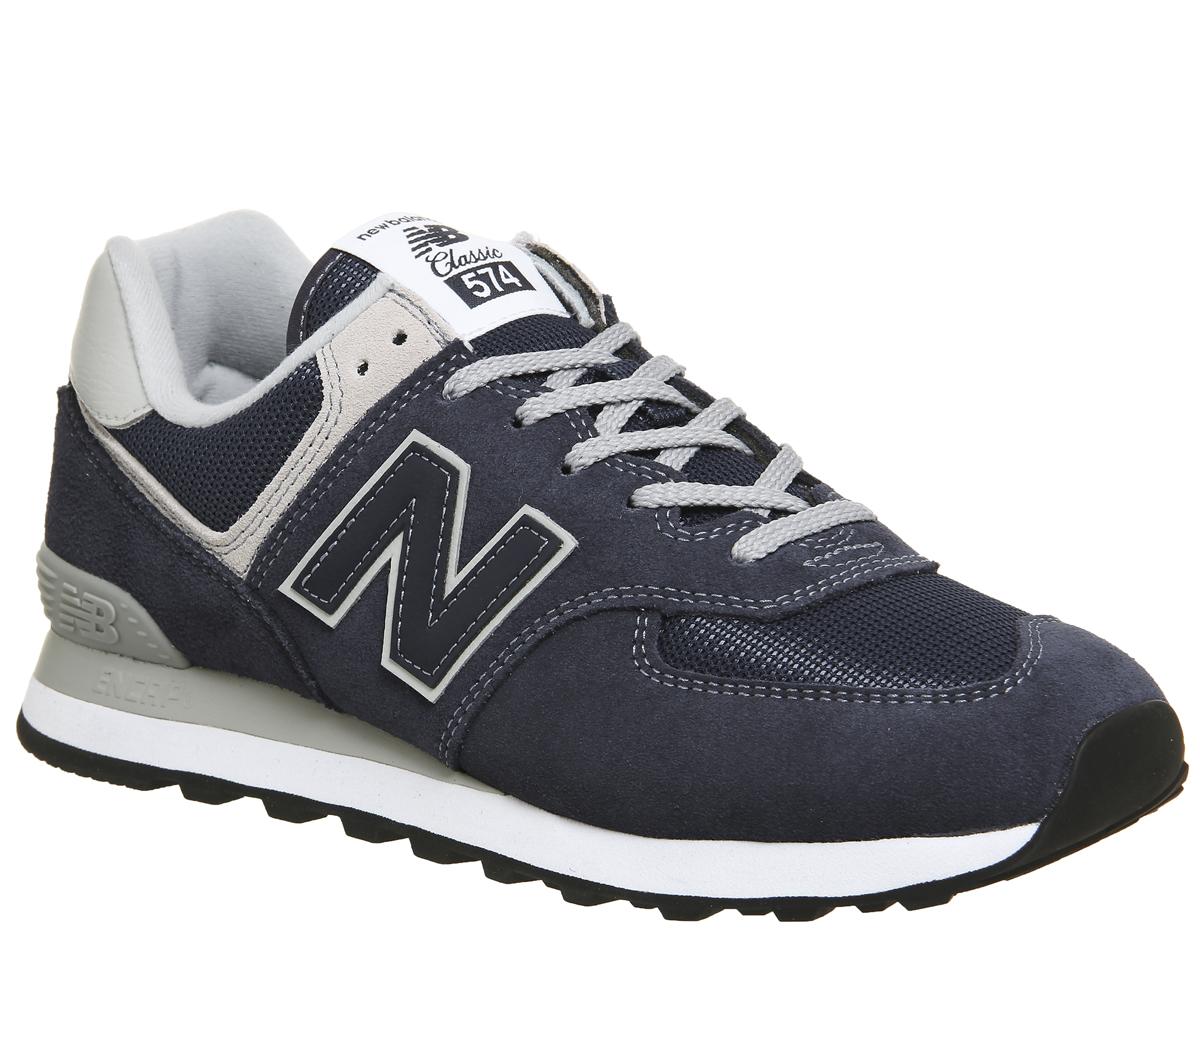 New Balance 574 Navy - His trainers